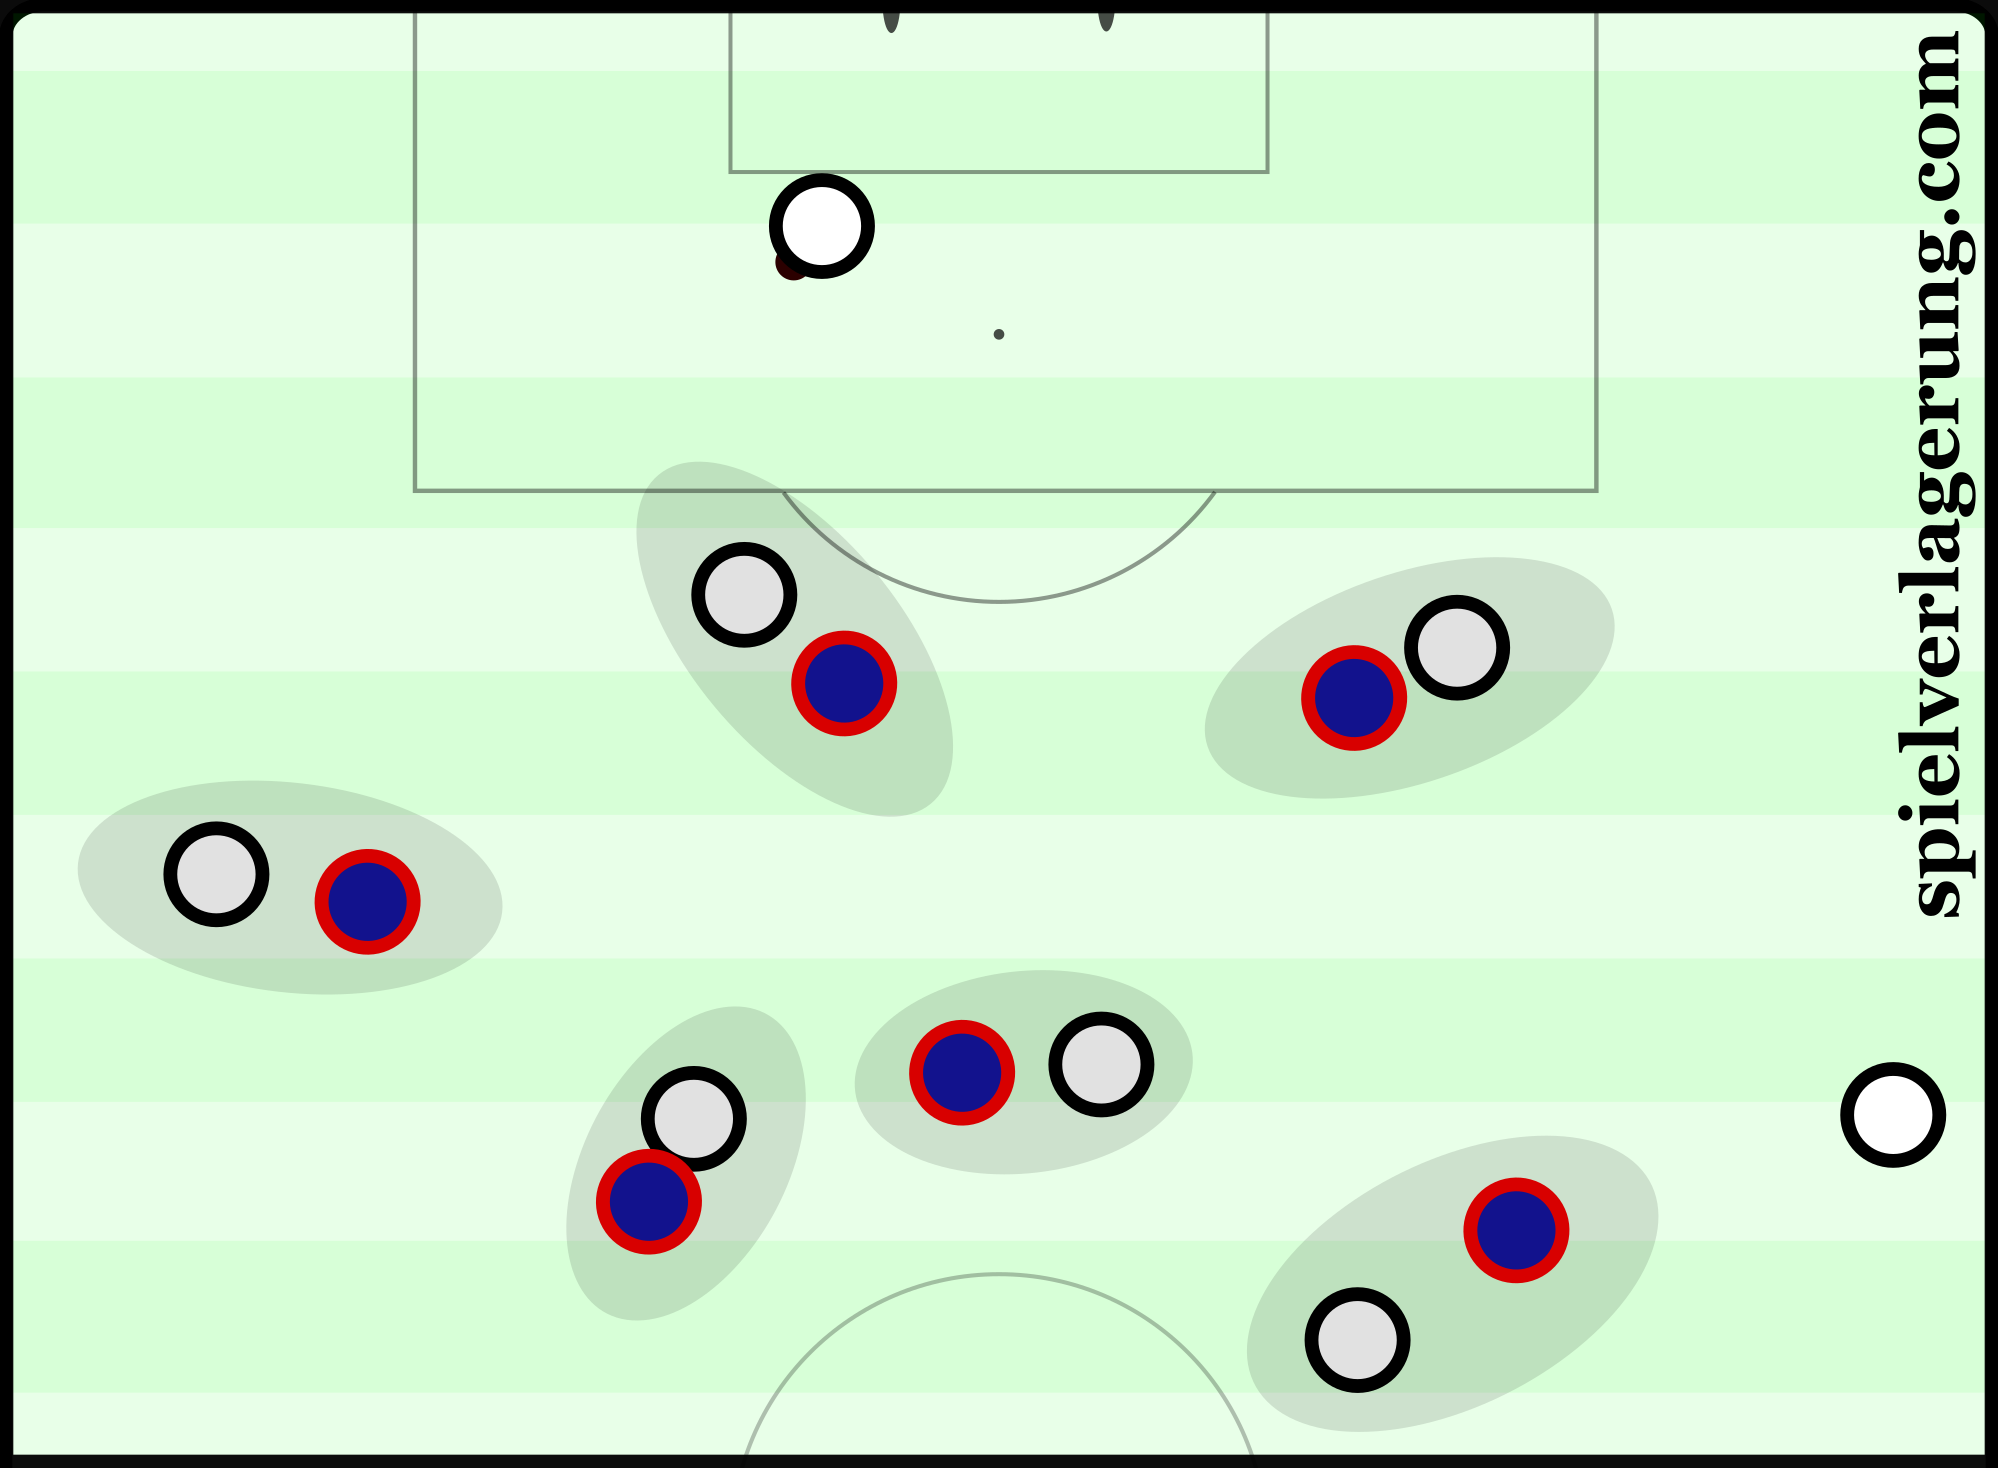 PSG's man-oriented defence.